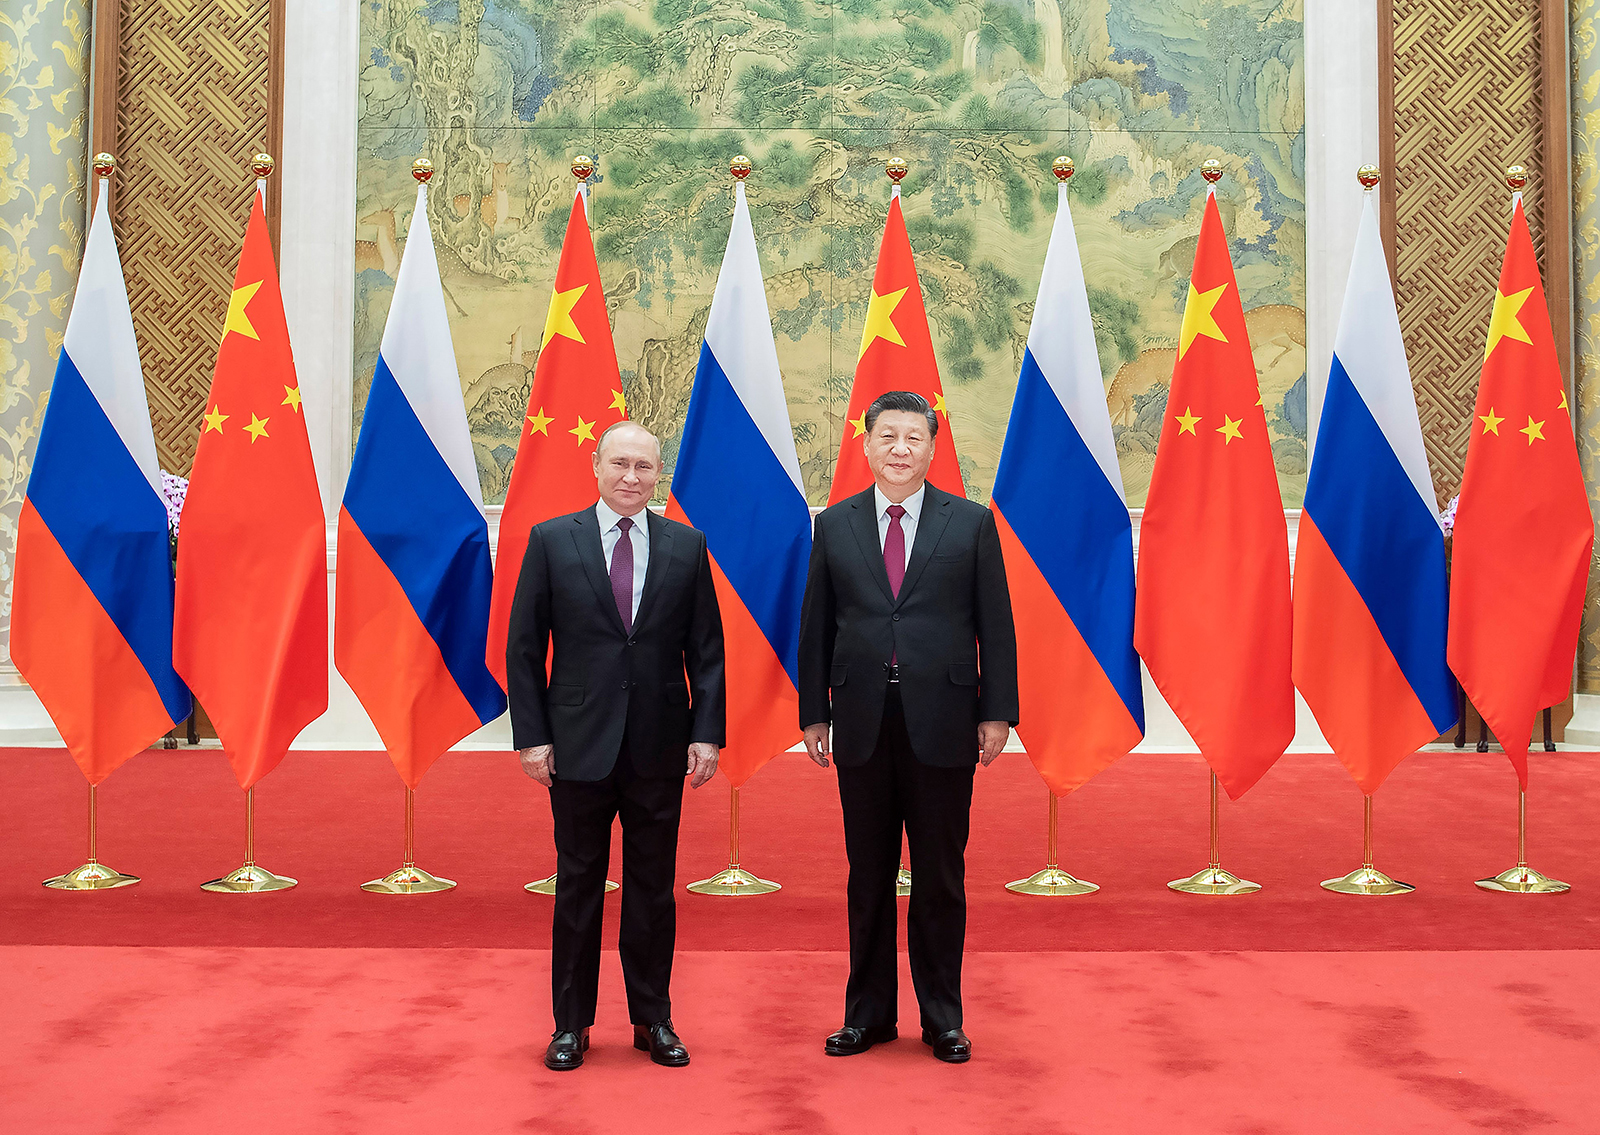 Xi Jinping and Vladimir Putin pose for pictures in Beijing on February 4, 2022. 